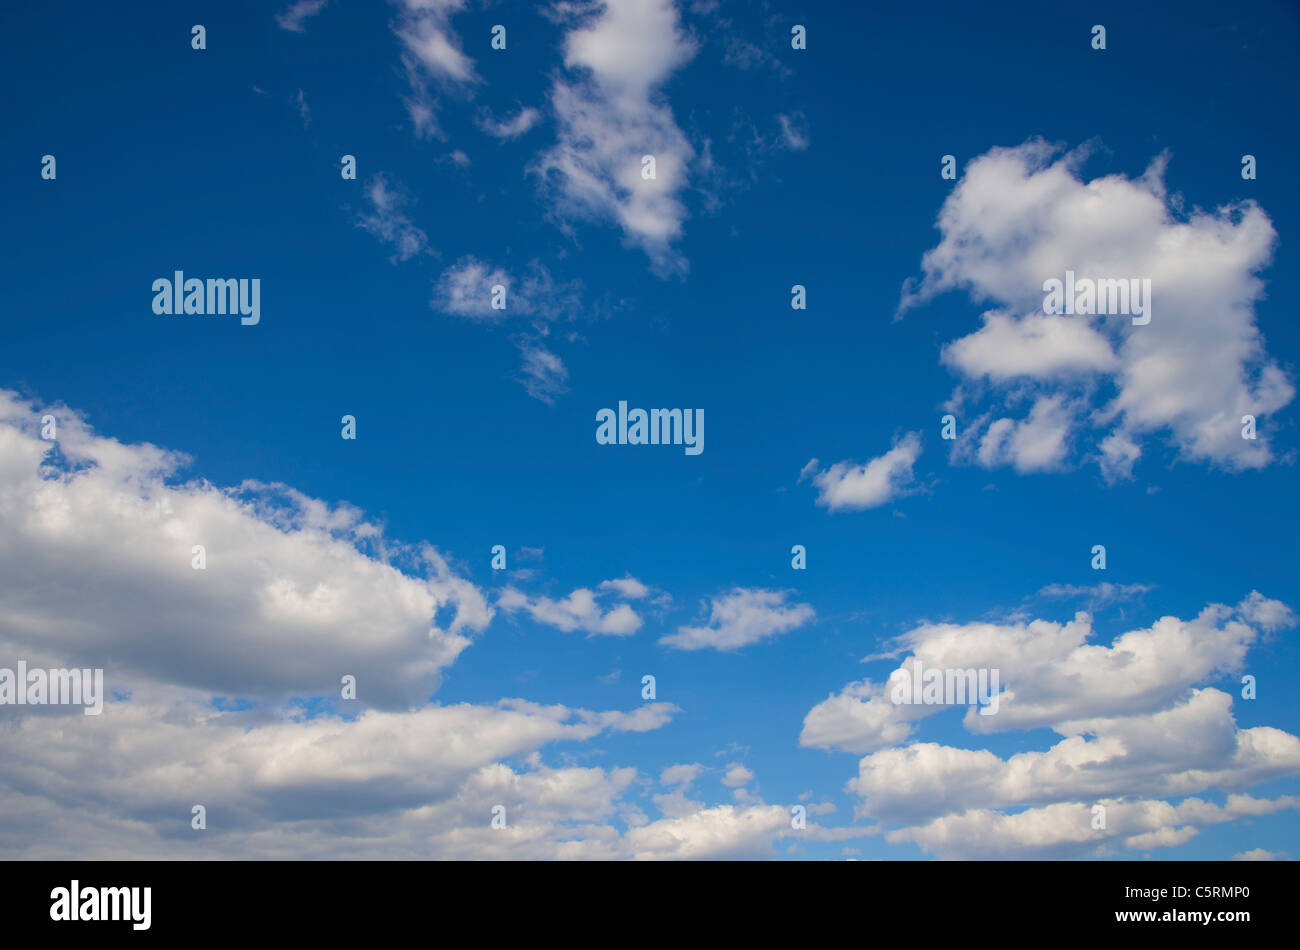 A bright blue sky with puffy white clouds Stock Photo